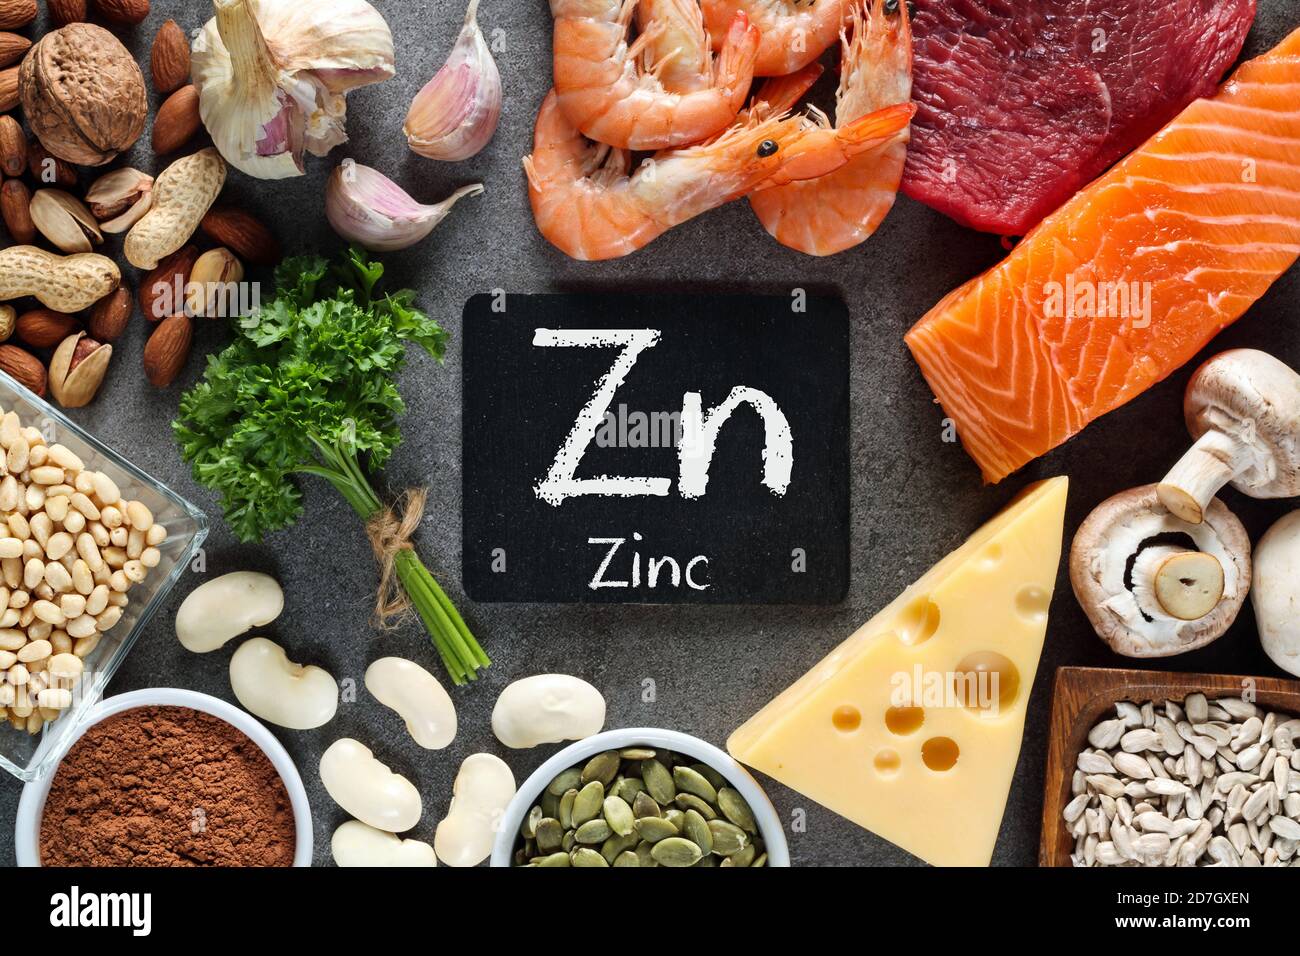 Foods High in Zinc as salmon, seafood-shrimps, beef, yellow cheese, parsley leaves, mushrooms, cocoa, pumpkin seeds, garlic, bean, almonds, pine nut. Stock Photo